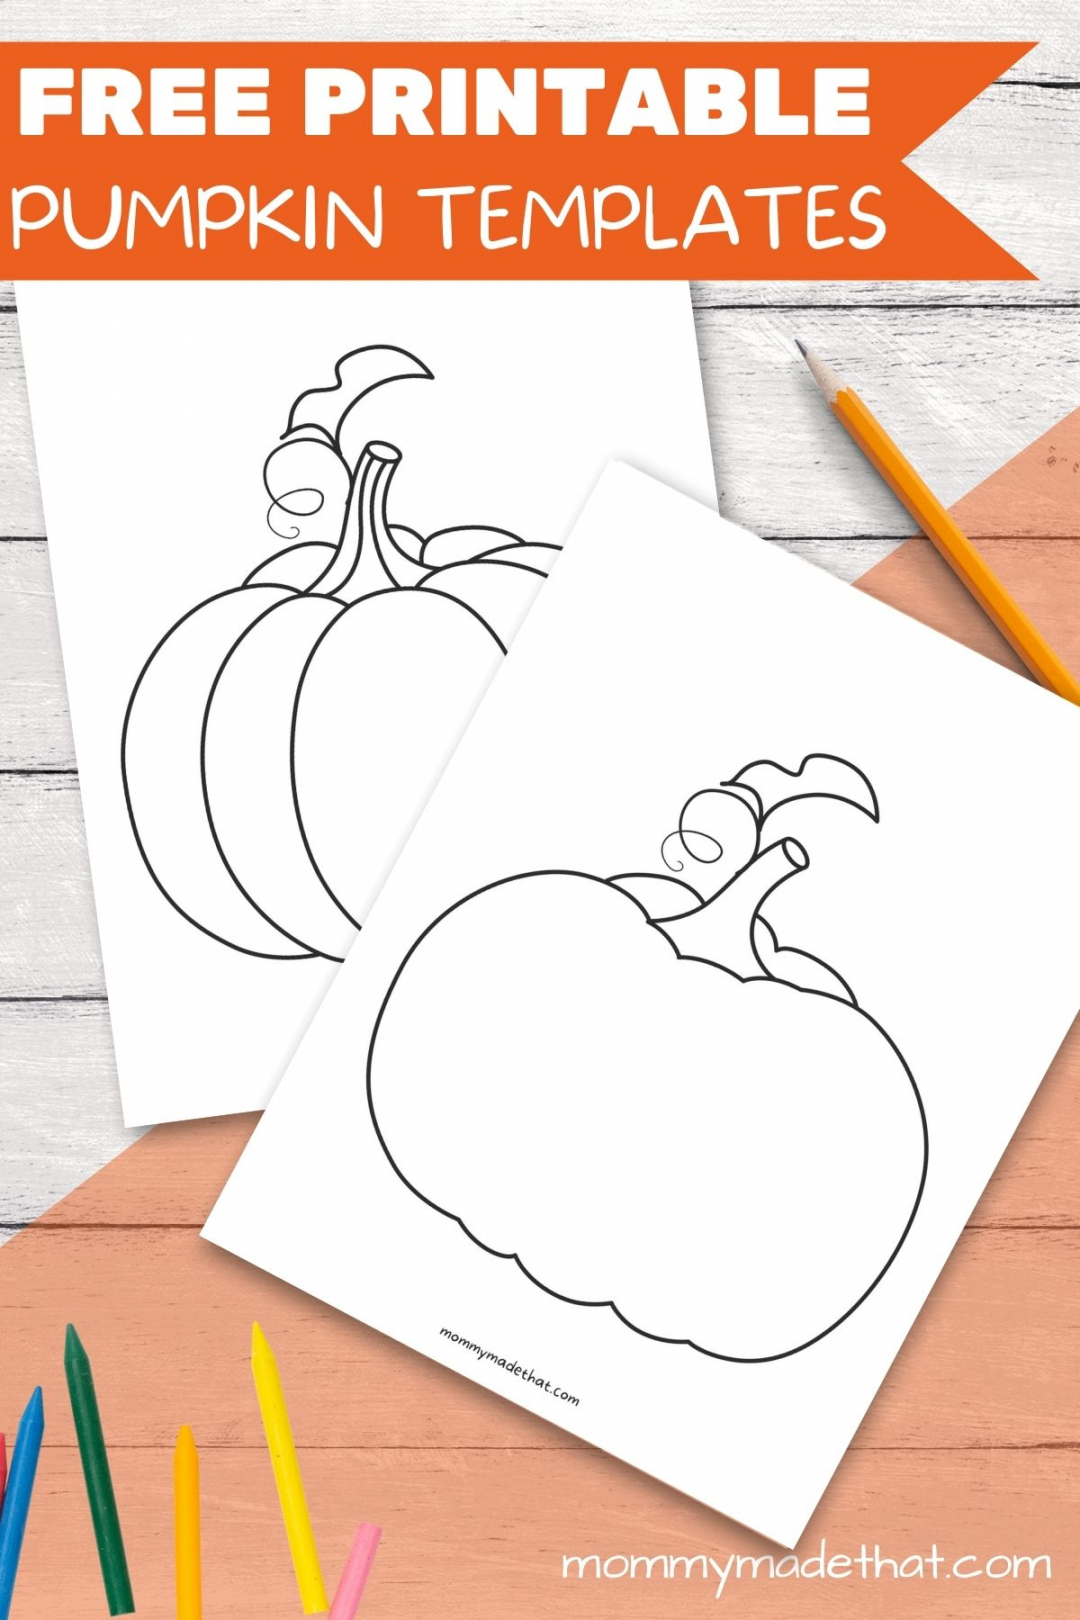 Free Printable Pumpkin Templates for Crafts and Activities - FREE Printables - Printable Cut Out Pumpkin Template